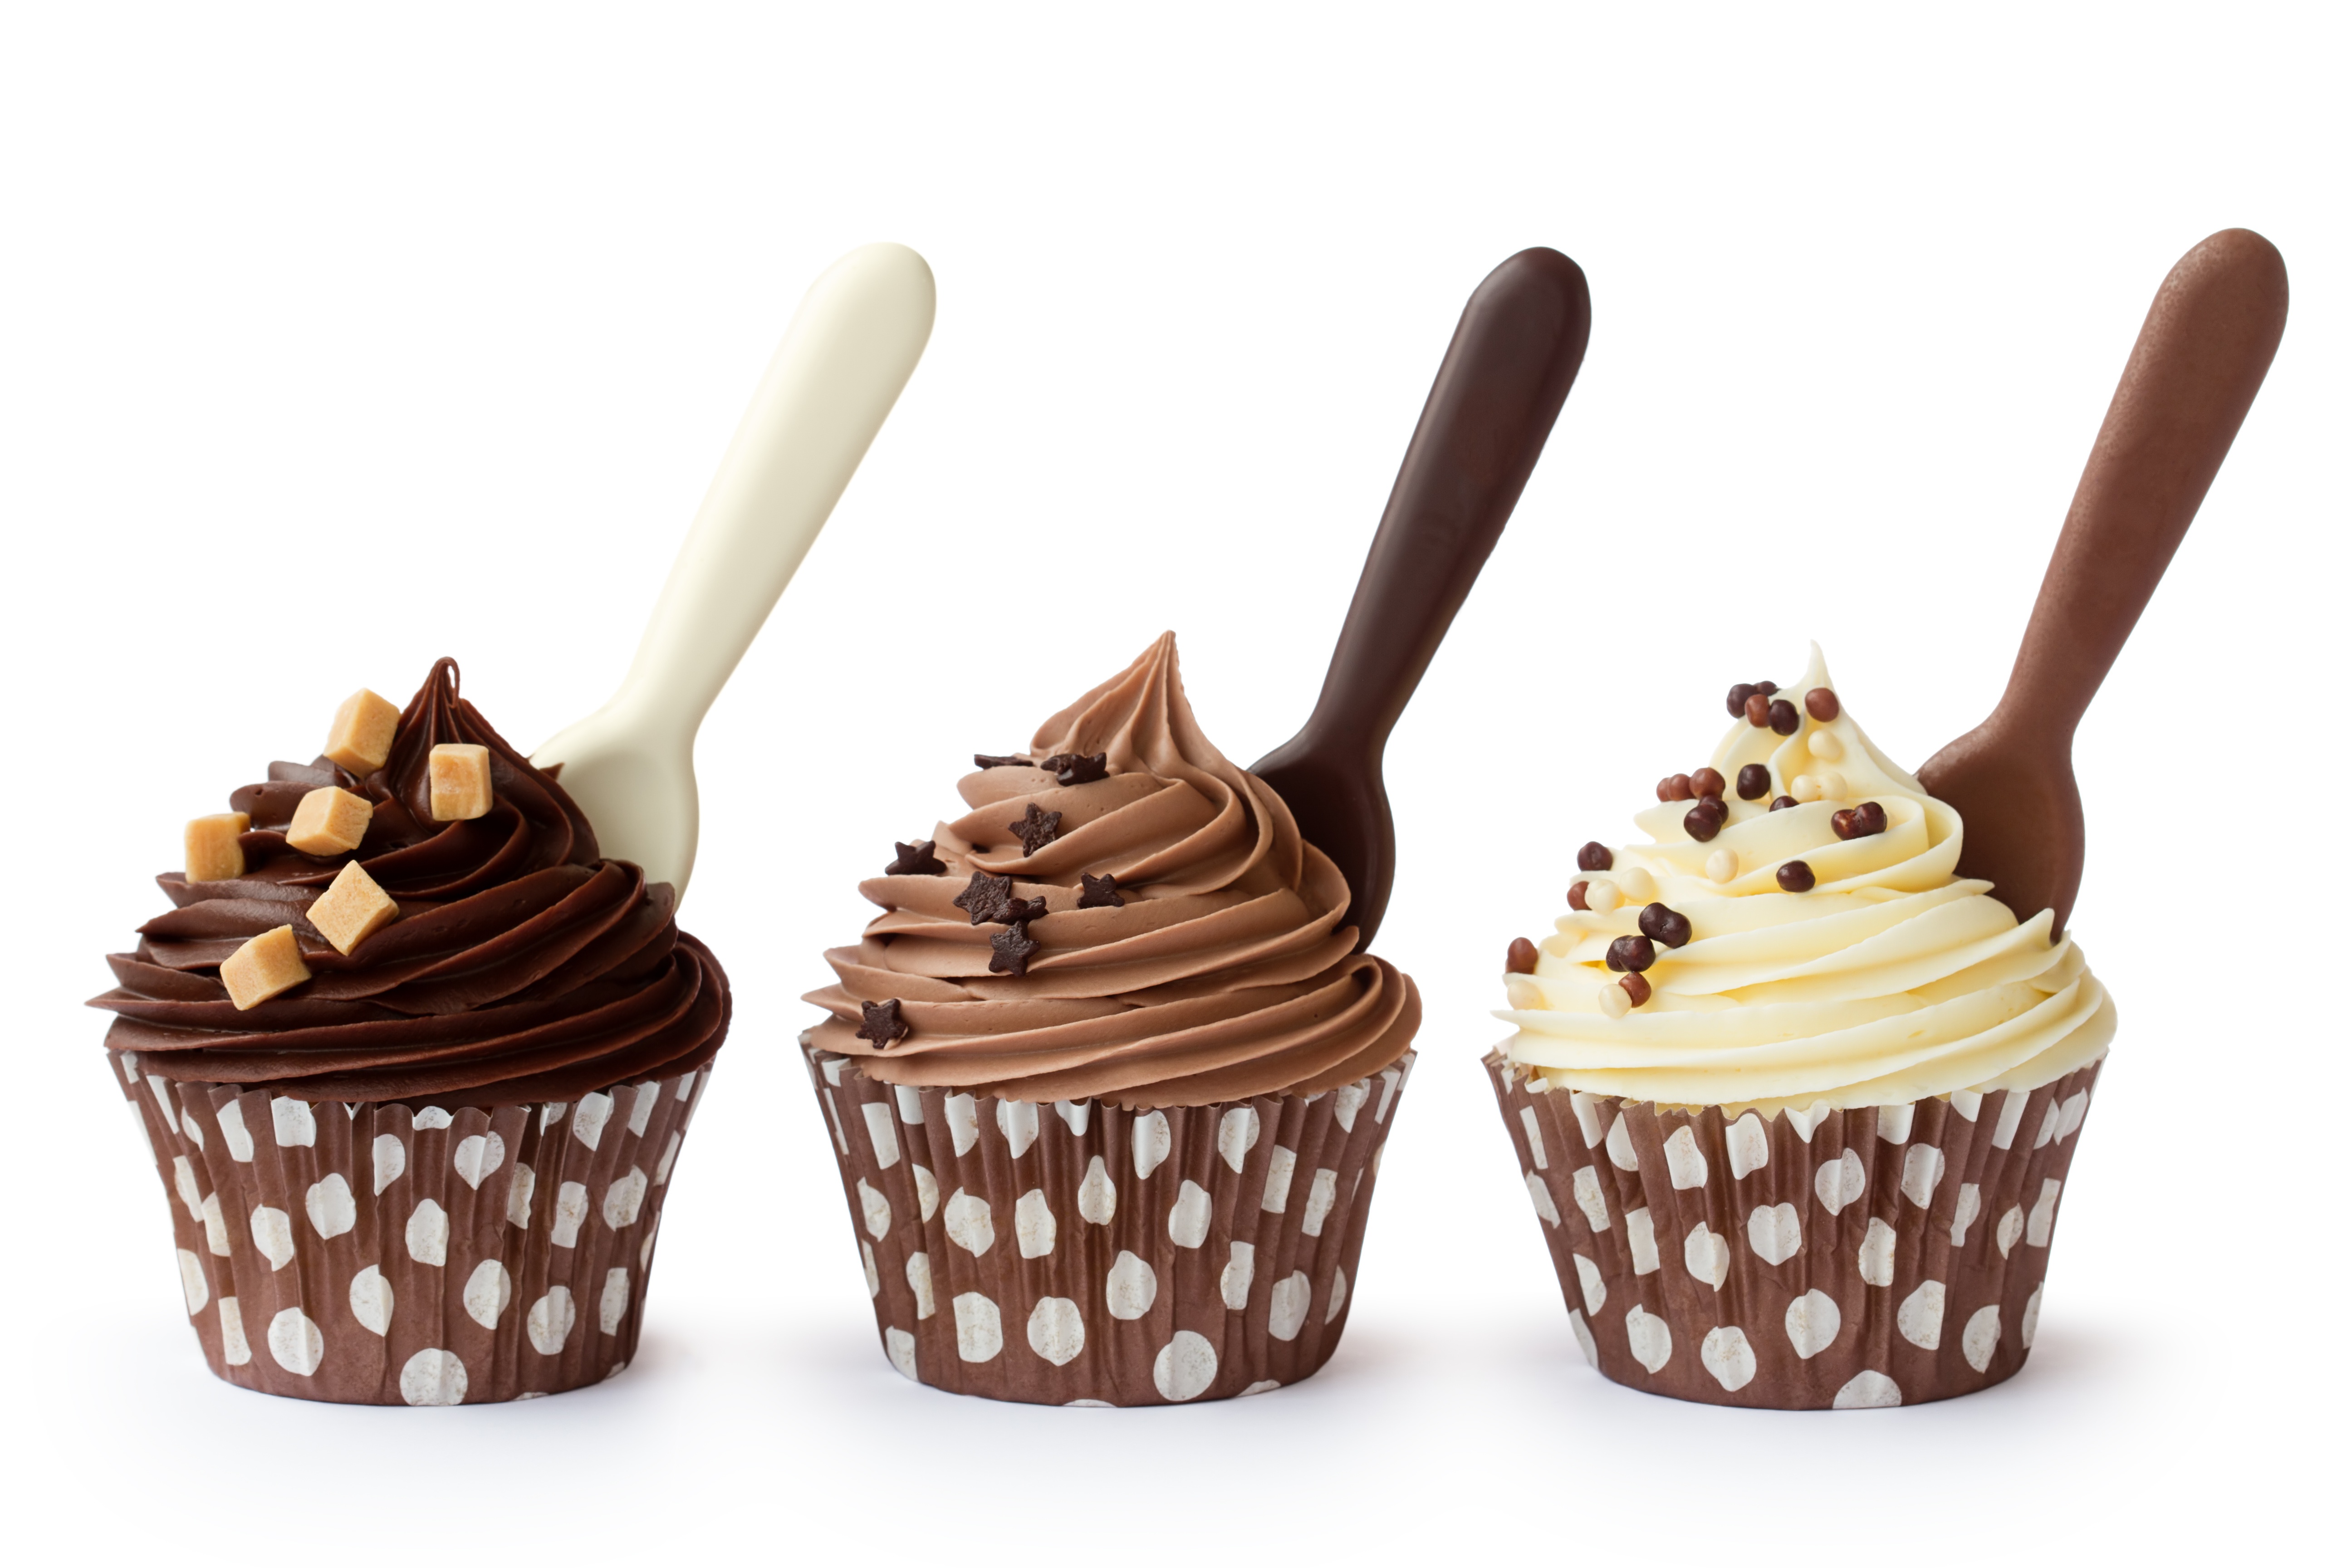 General 5184x3456 food sweets spoon chocolate cupcakes simple background closeup